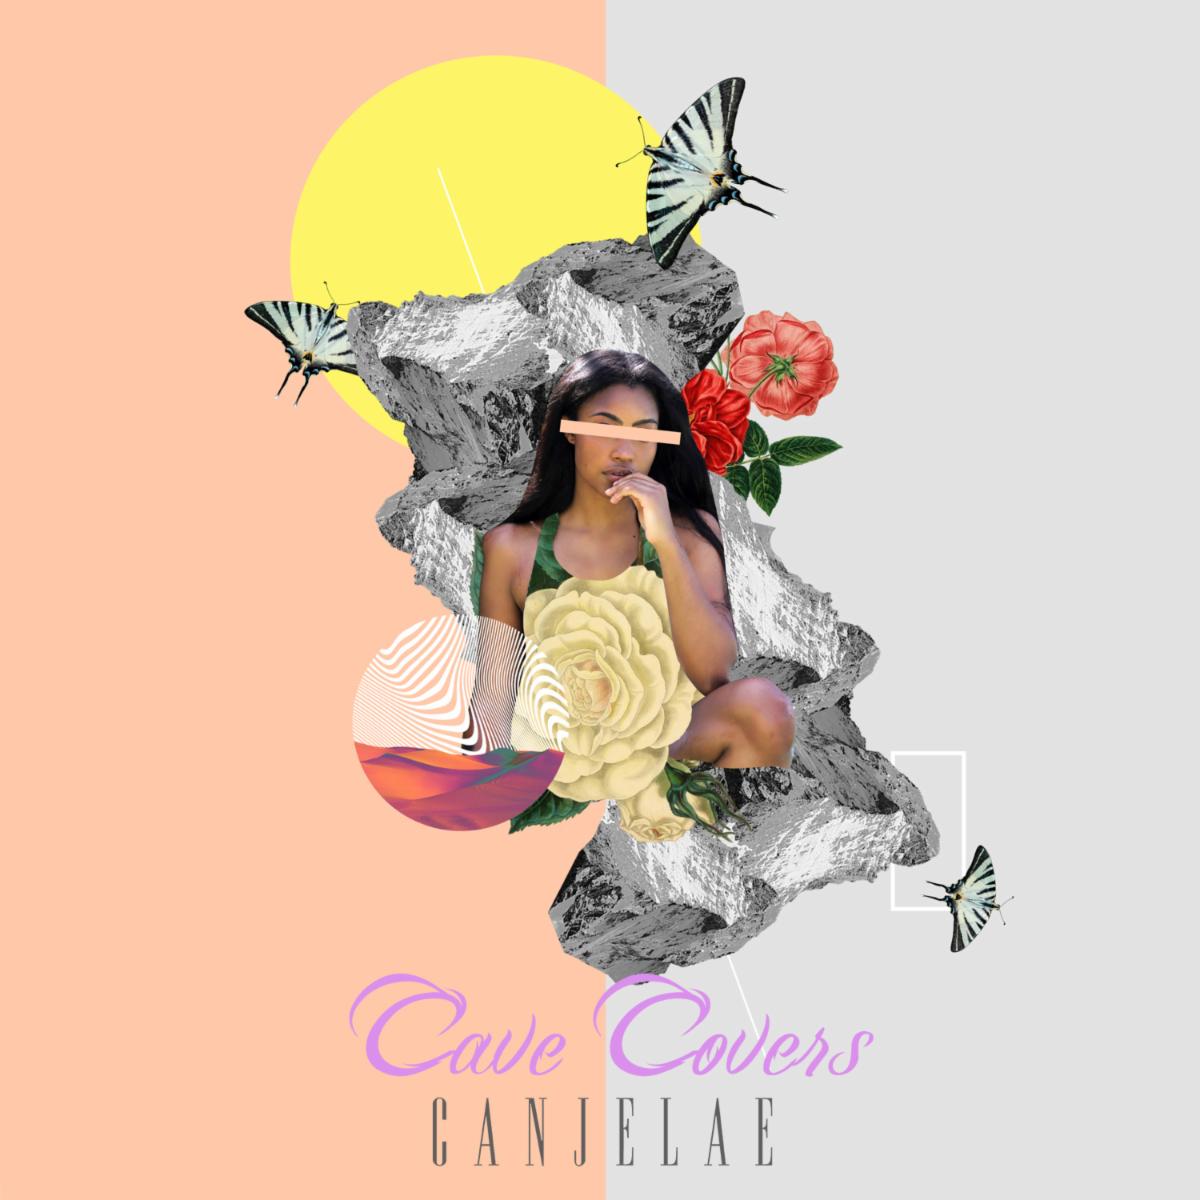 Canjelae Releases “Cave Covers” EP with Appearances from Kevin Ross & Jacob Latimore